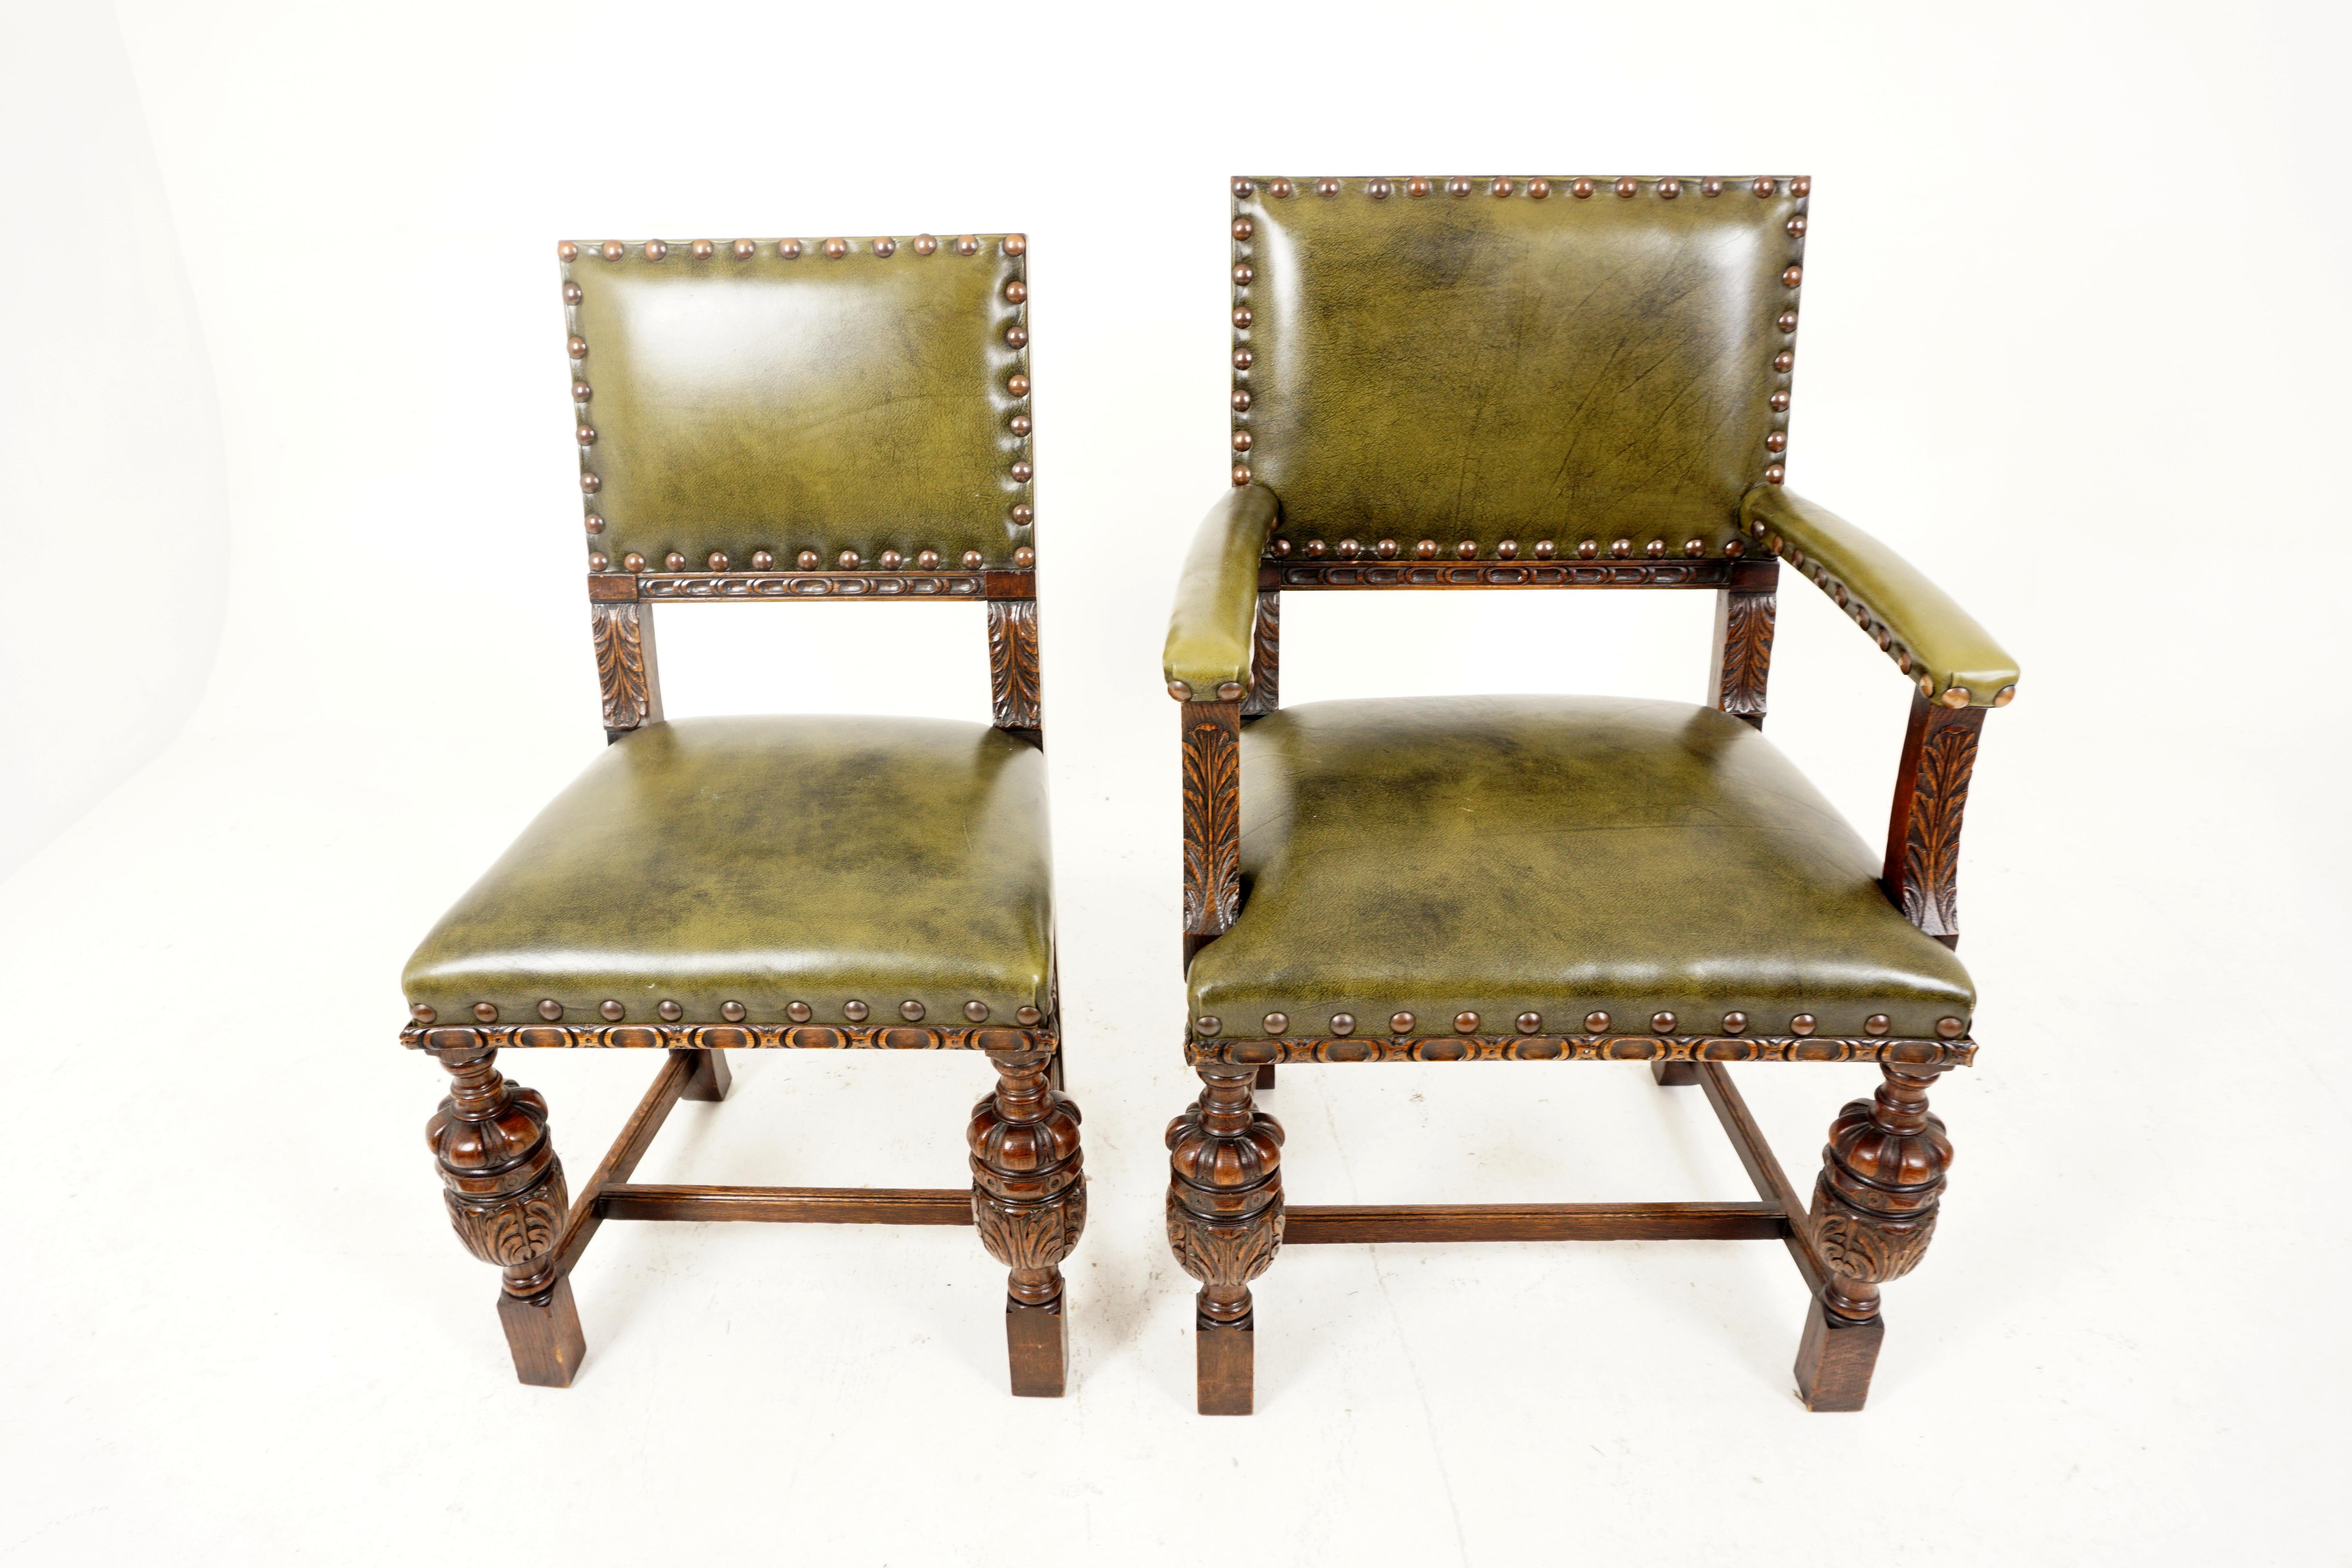 Hand-Crafted Antique Set of 5 Carved Oak Upholstered Dining Chairs, Scotland 1920, B2626A